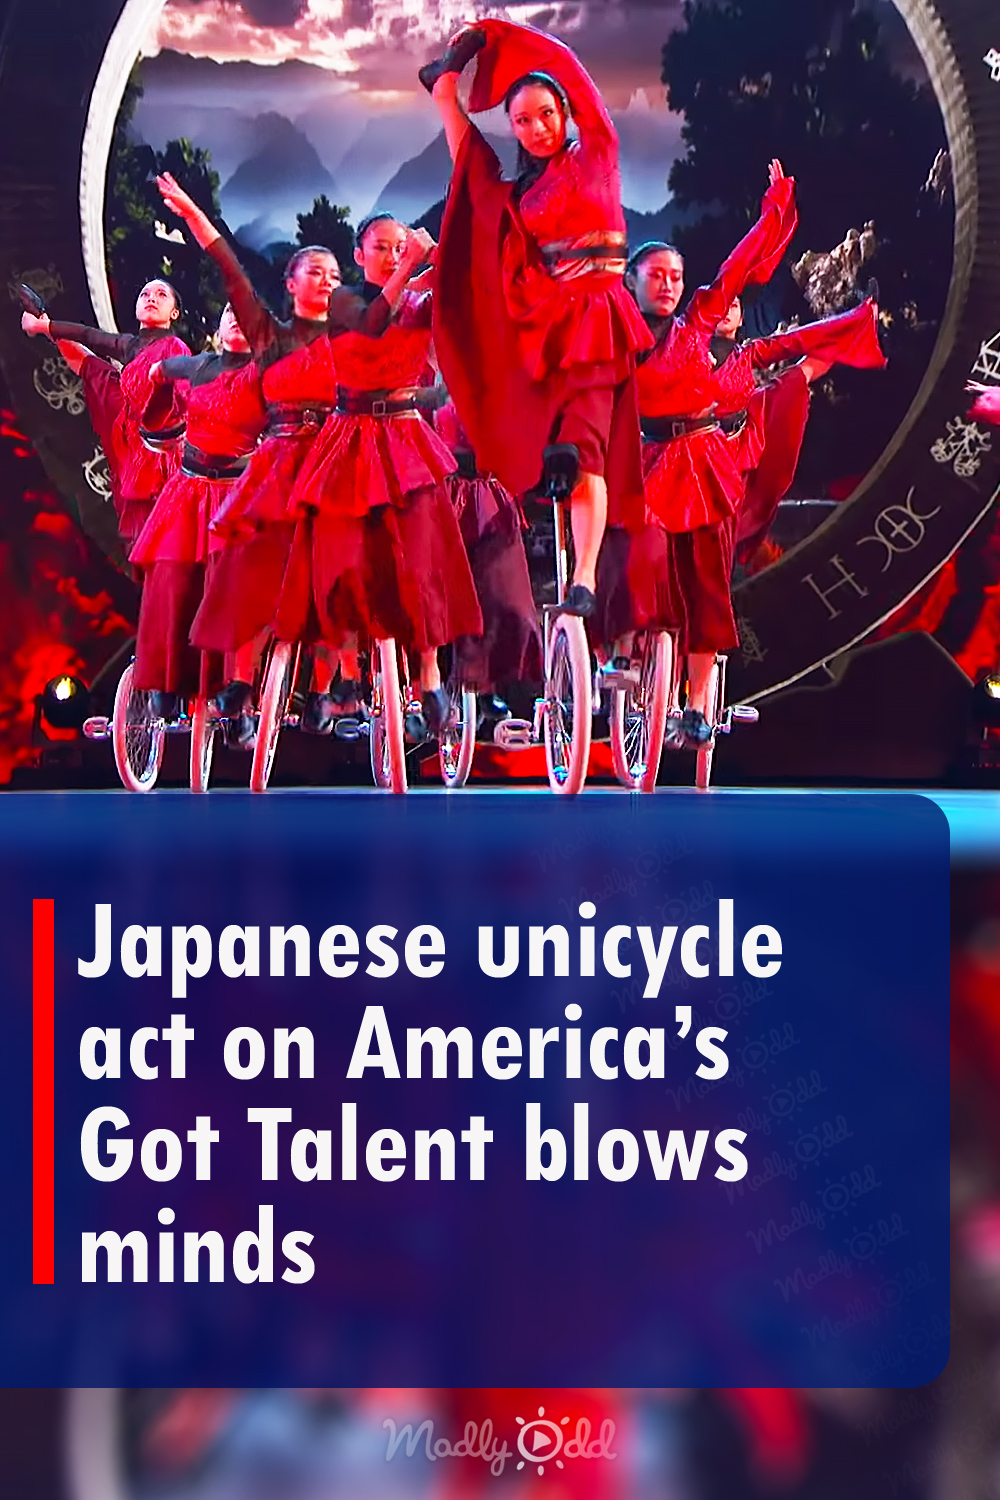 Japanese unicycle act on America’s Got Talent blows minds